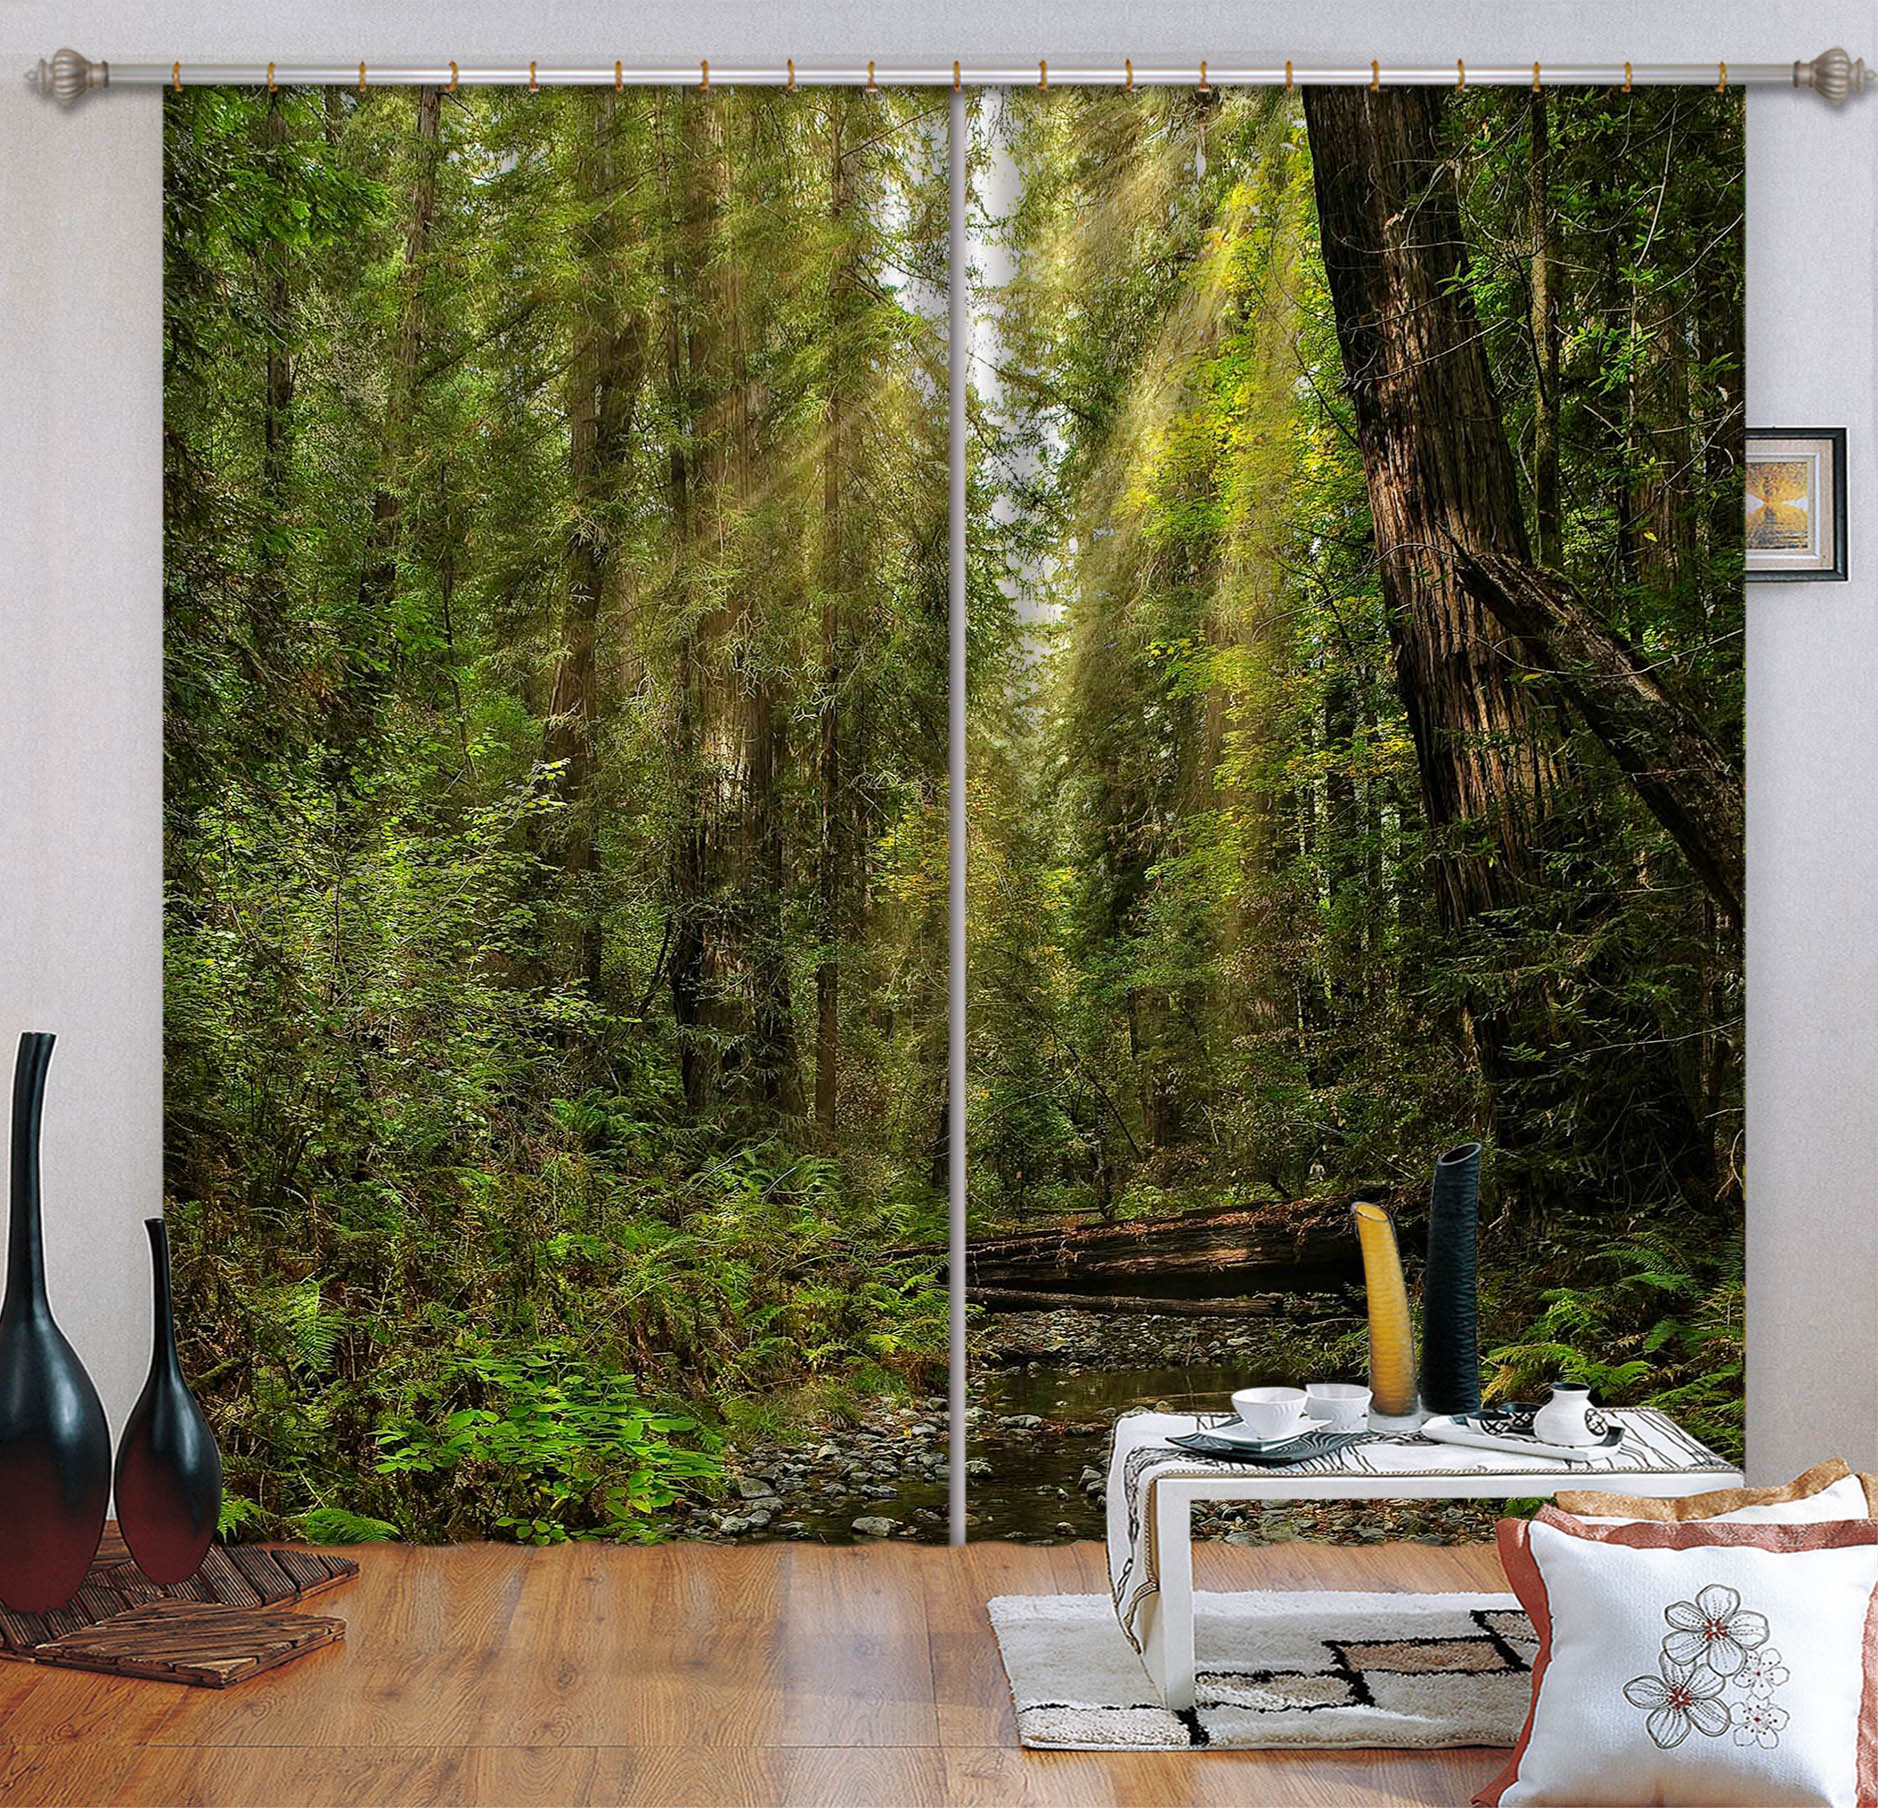 3D Forest Stream 62145 Kathy Barefield Curtain Curtains Drapes